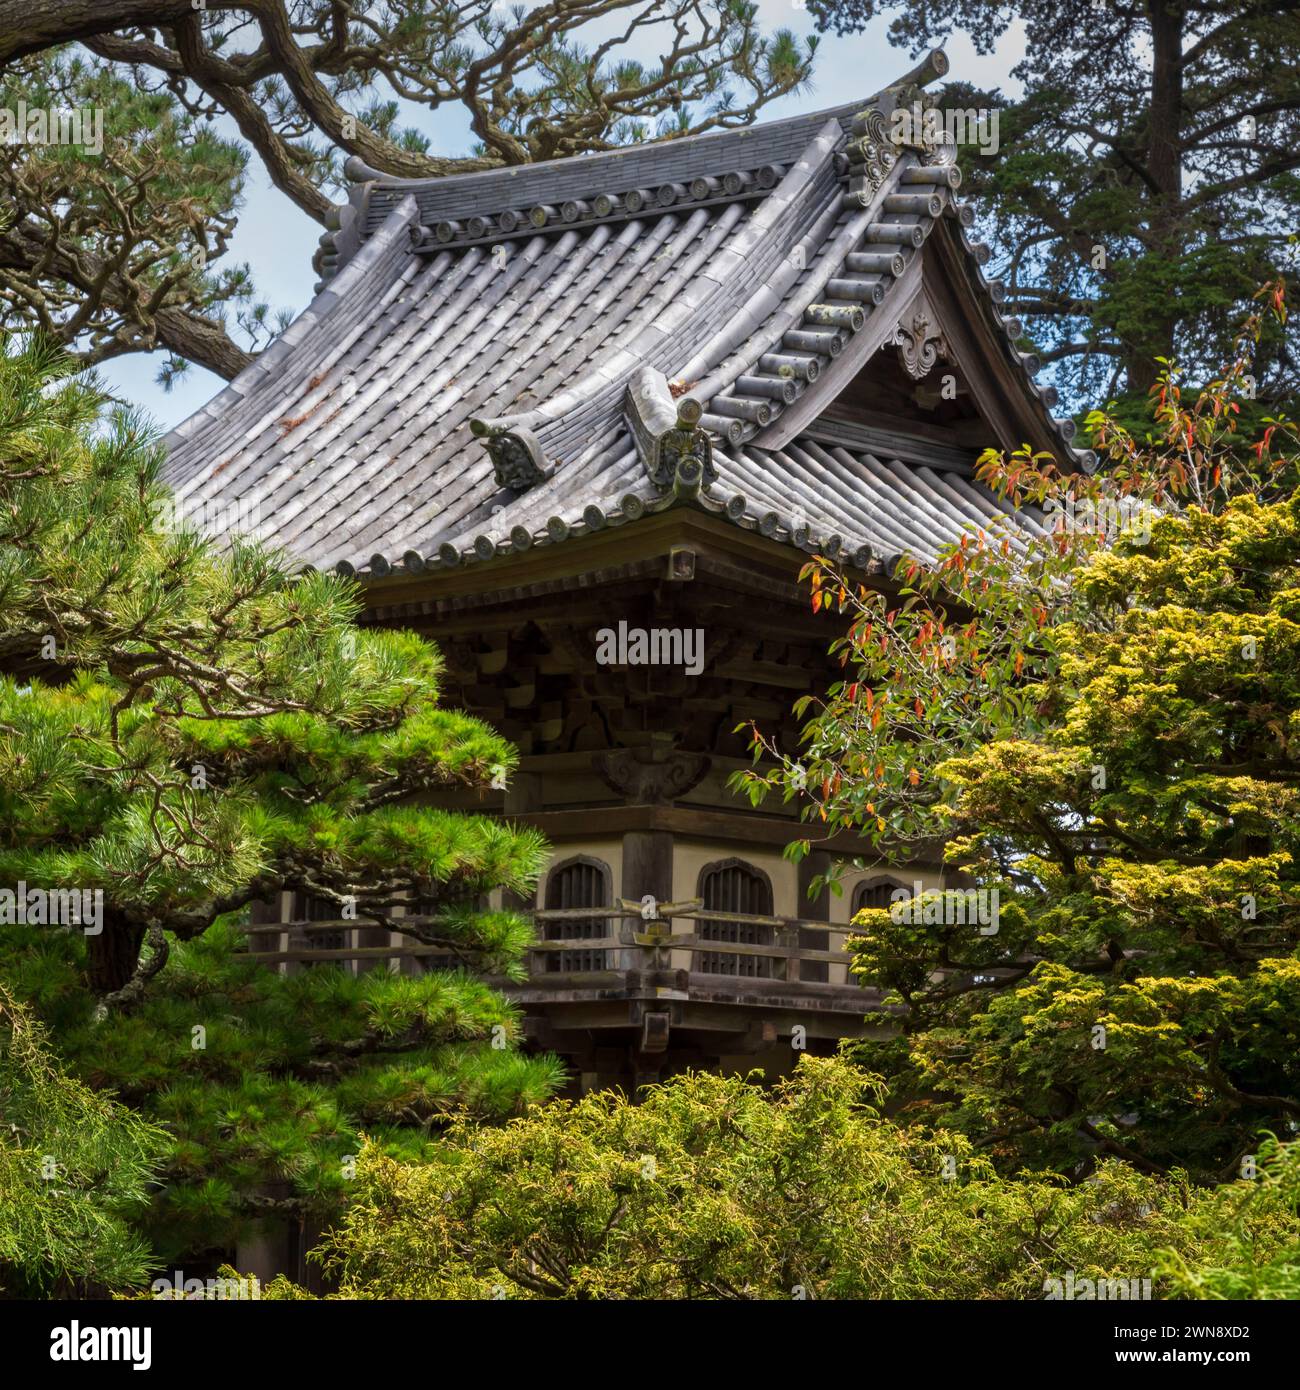 Lush vegetation and colourful architecture of the Japanese Tea Garden in Golden Gate Park, San Francisco, California. Stock Photo